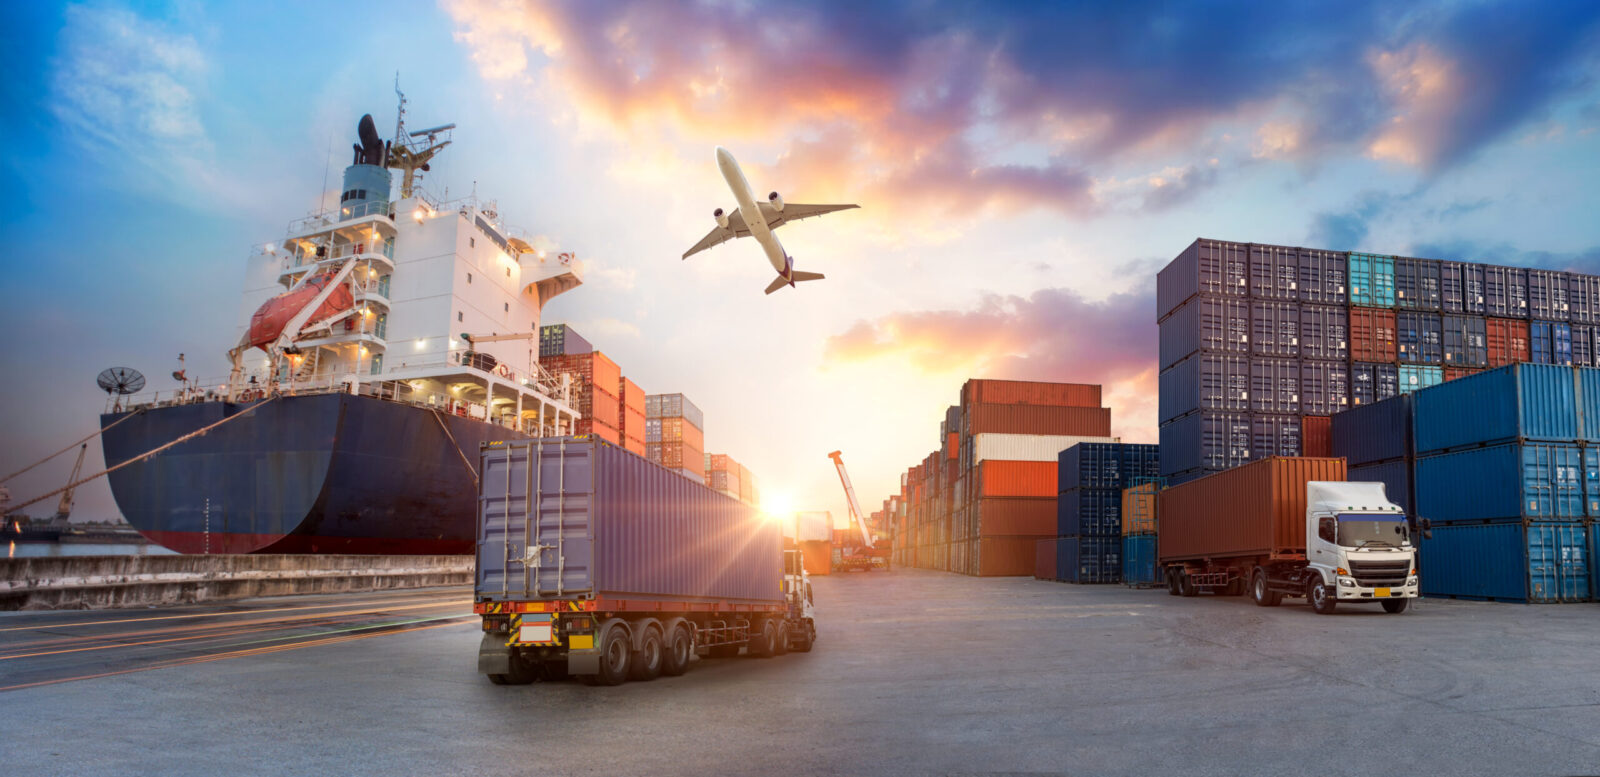 Featured image for “5 Things You Should Know Before You Hire: Freight and Logistics”